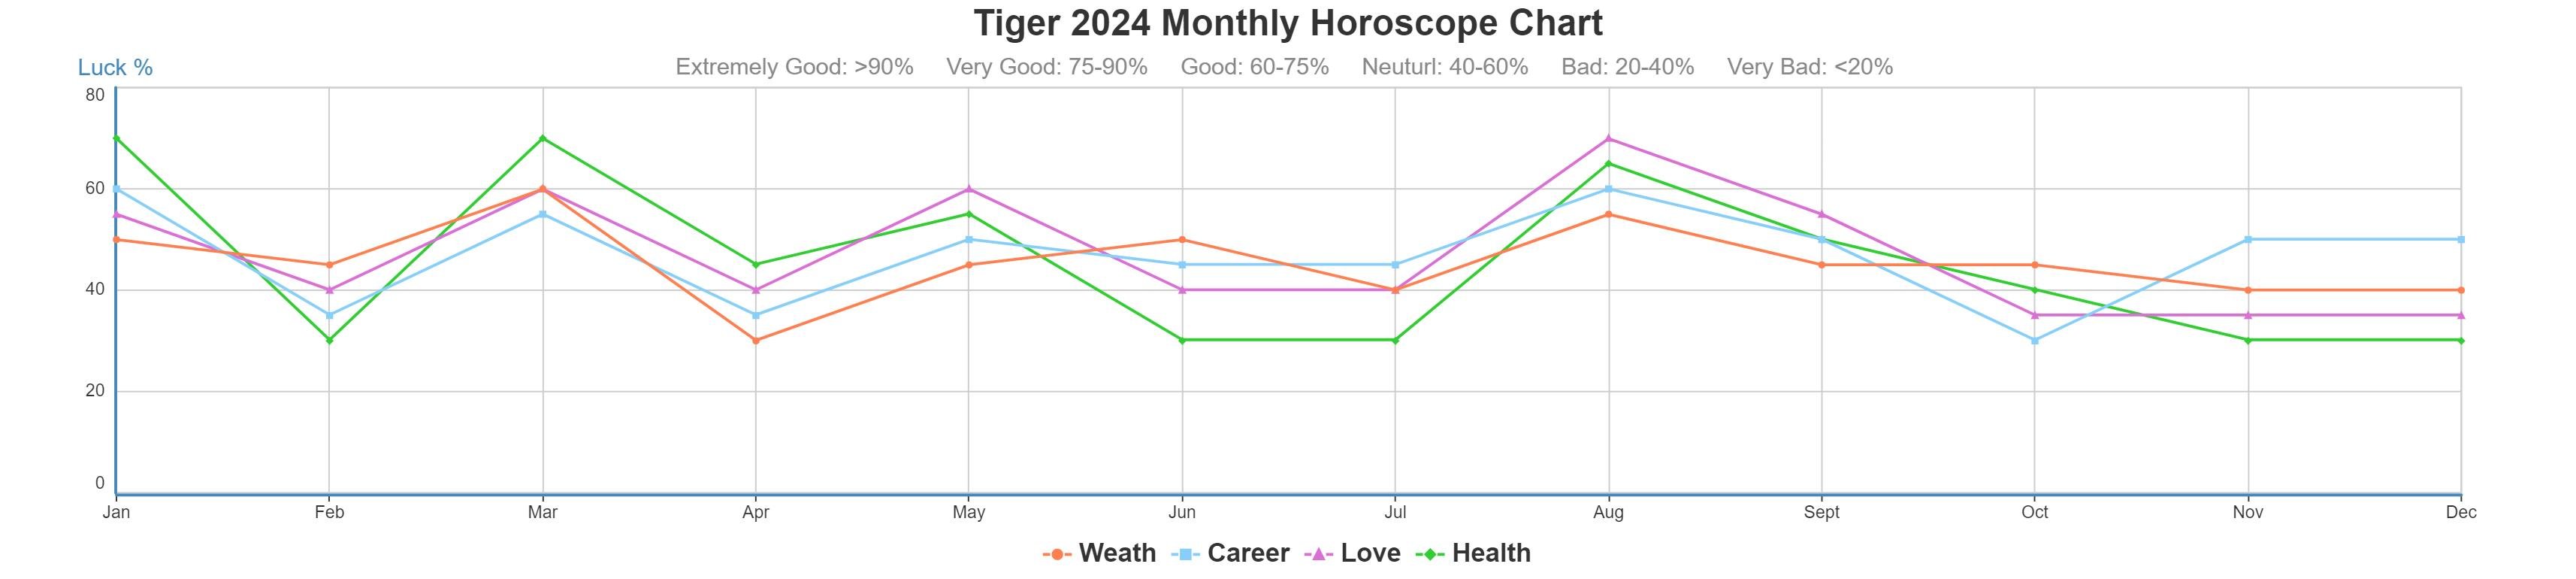 Chinese Horoscope for Tiger, 2023/2024 Yearly and Monthly Predictions